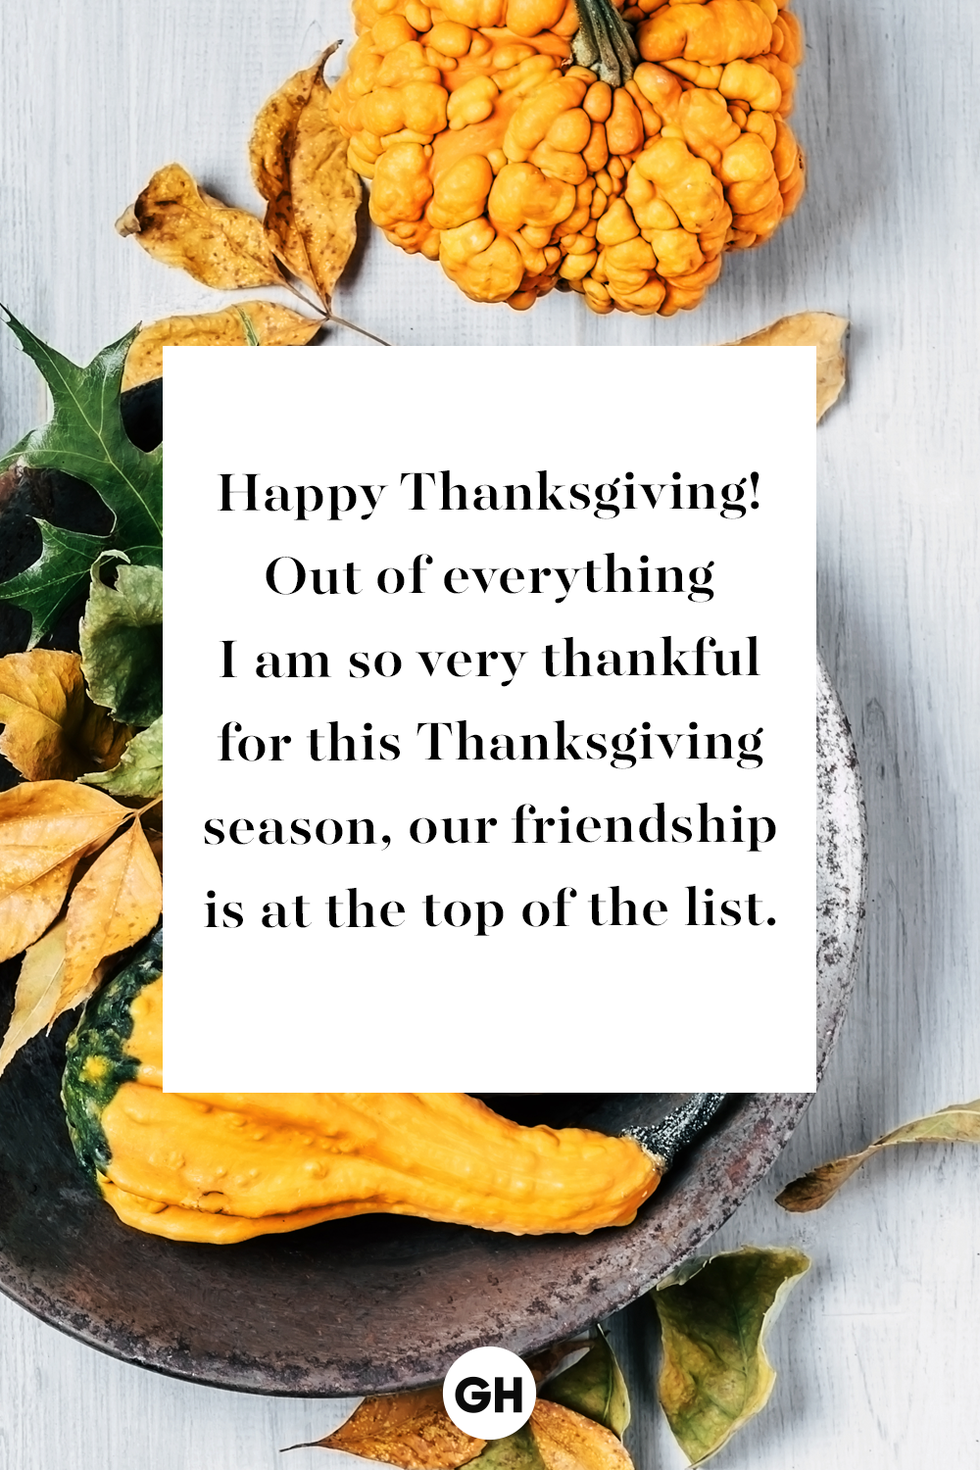 HAPPY THANKSGIVING – TODAY AND ALL THE YEAR ROUND! - Blog